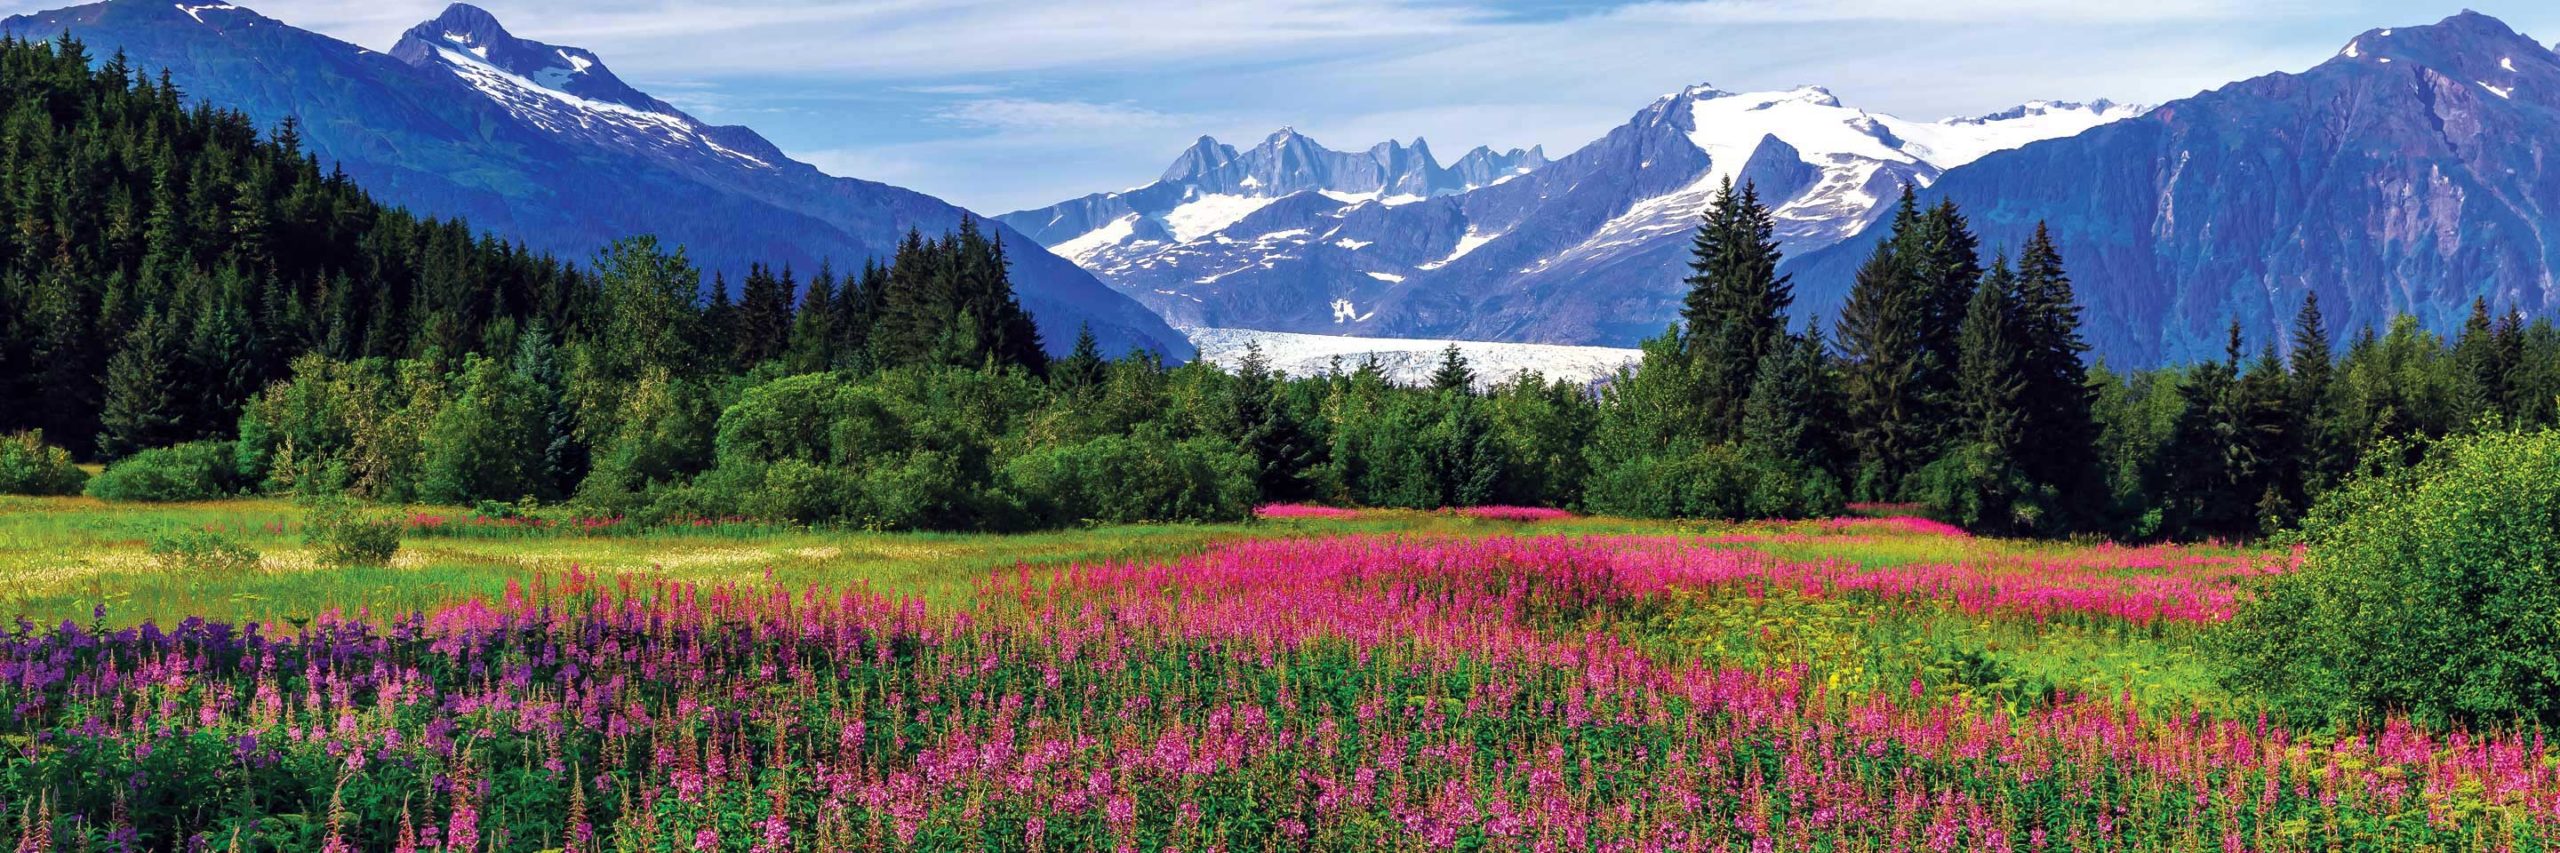 Field of wild flowers and mountains in SE Alaska